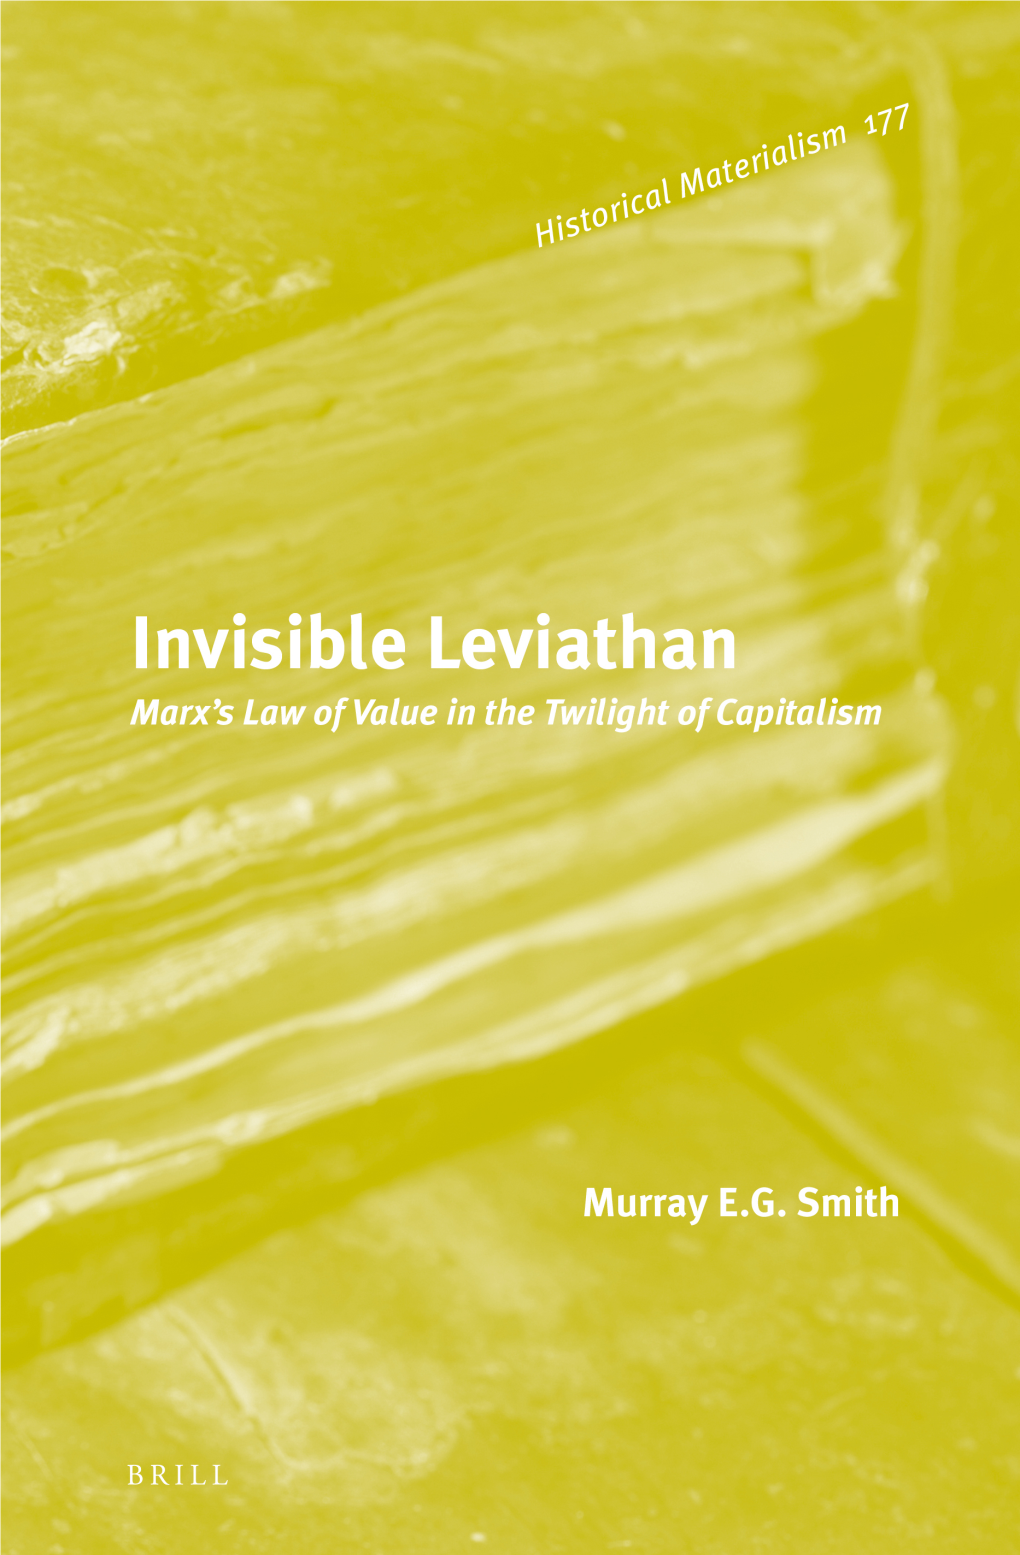 Invisible Leviathan: Marx's Law of Value in the Twilight